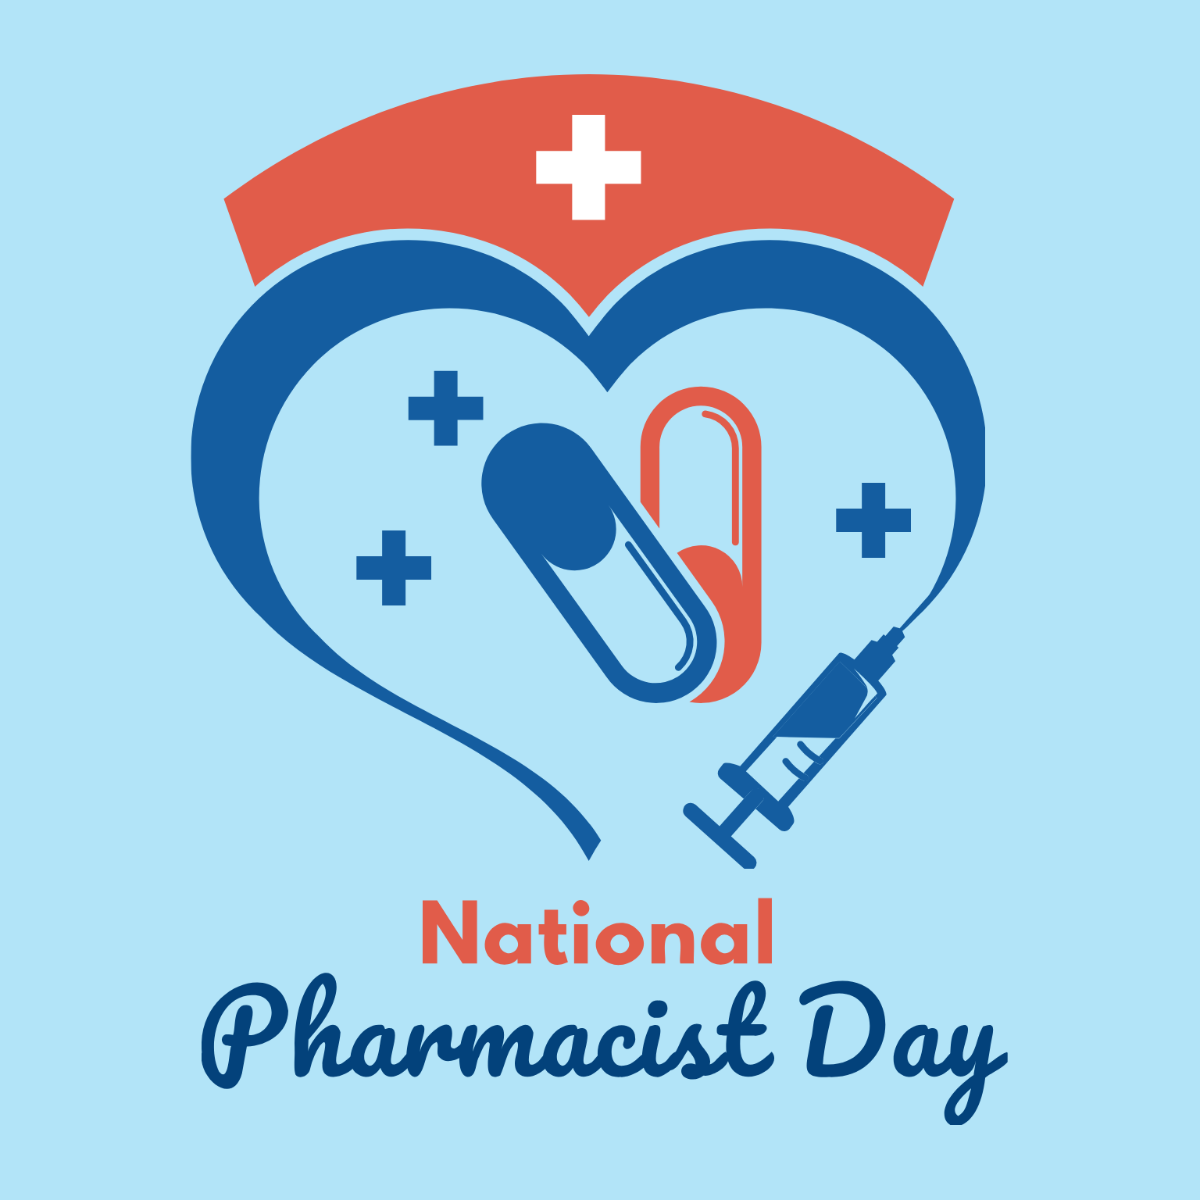 Free National Pharmacist Day Celebration Vector Template